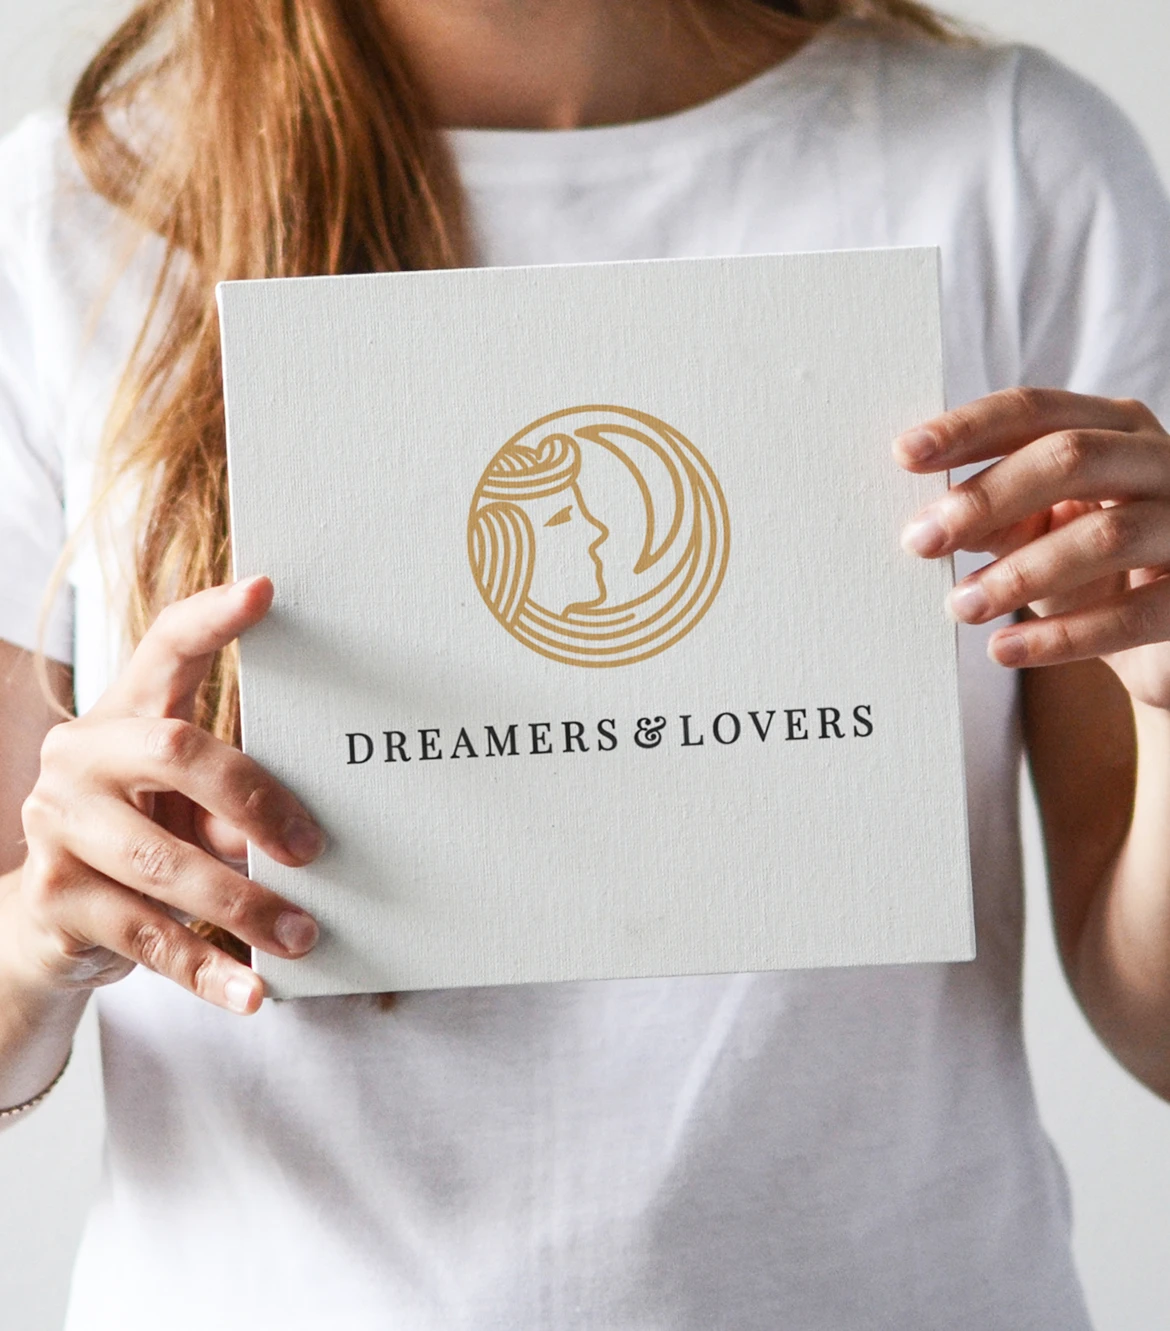 Dreamers and Lovers sign held by female model